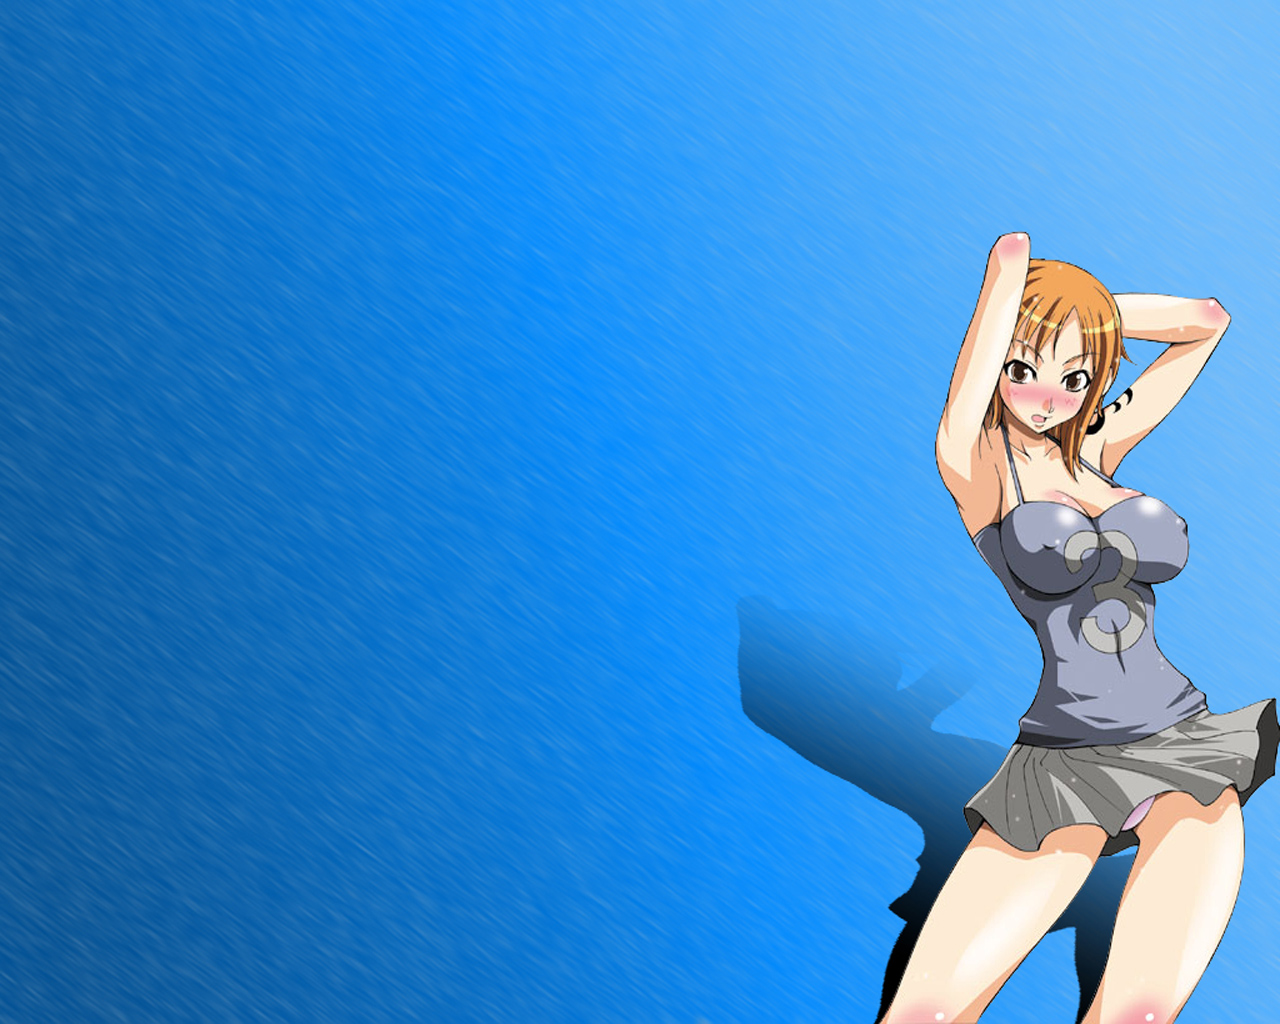 Manga And Anime Wallpapers One Piece Sexy Wallpaper 1280x1024